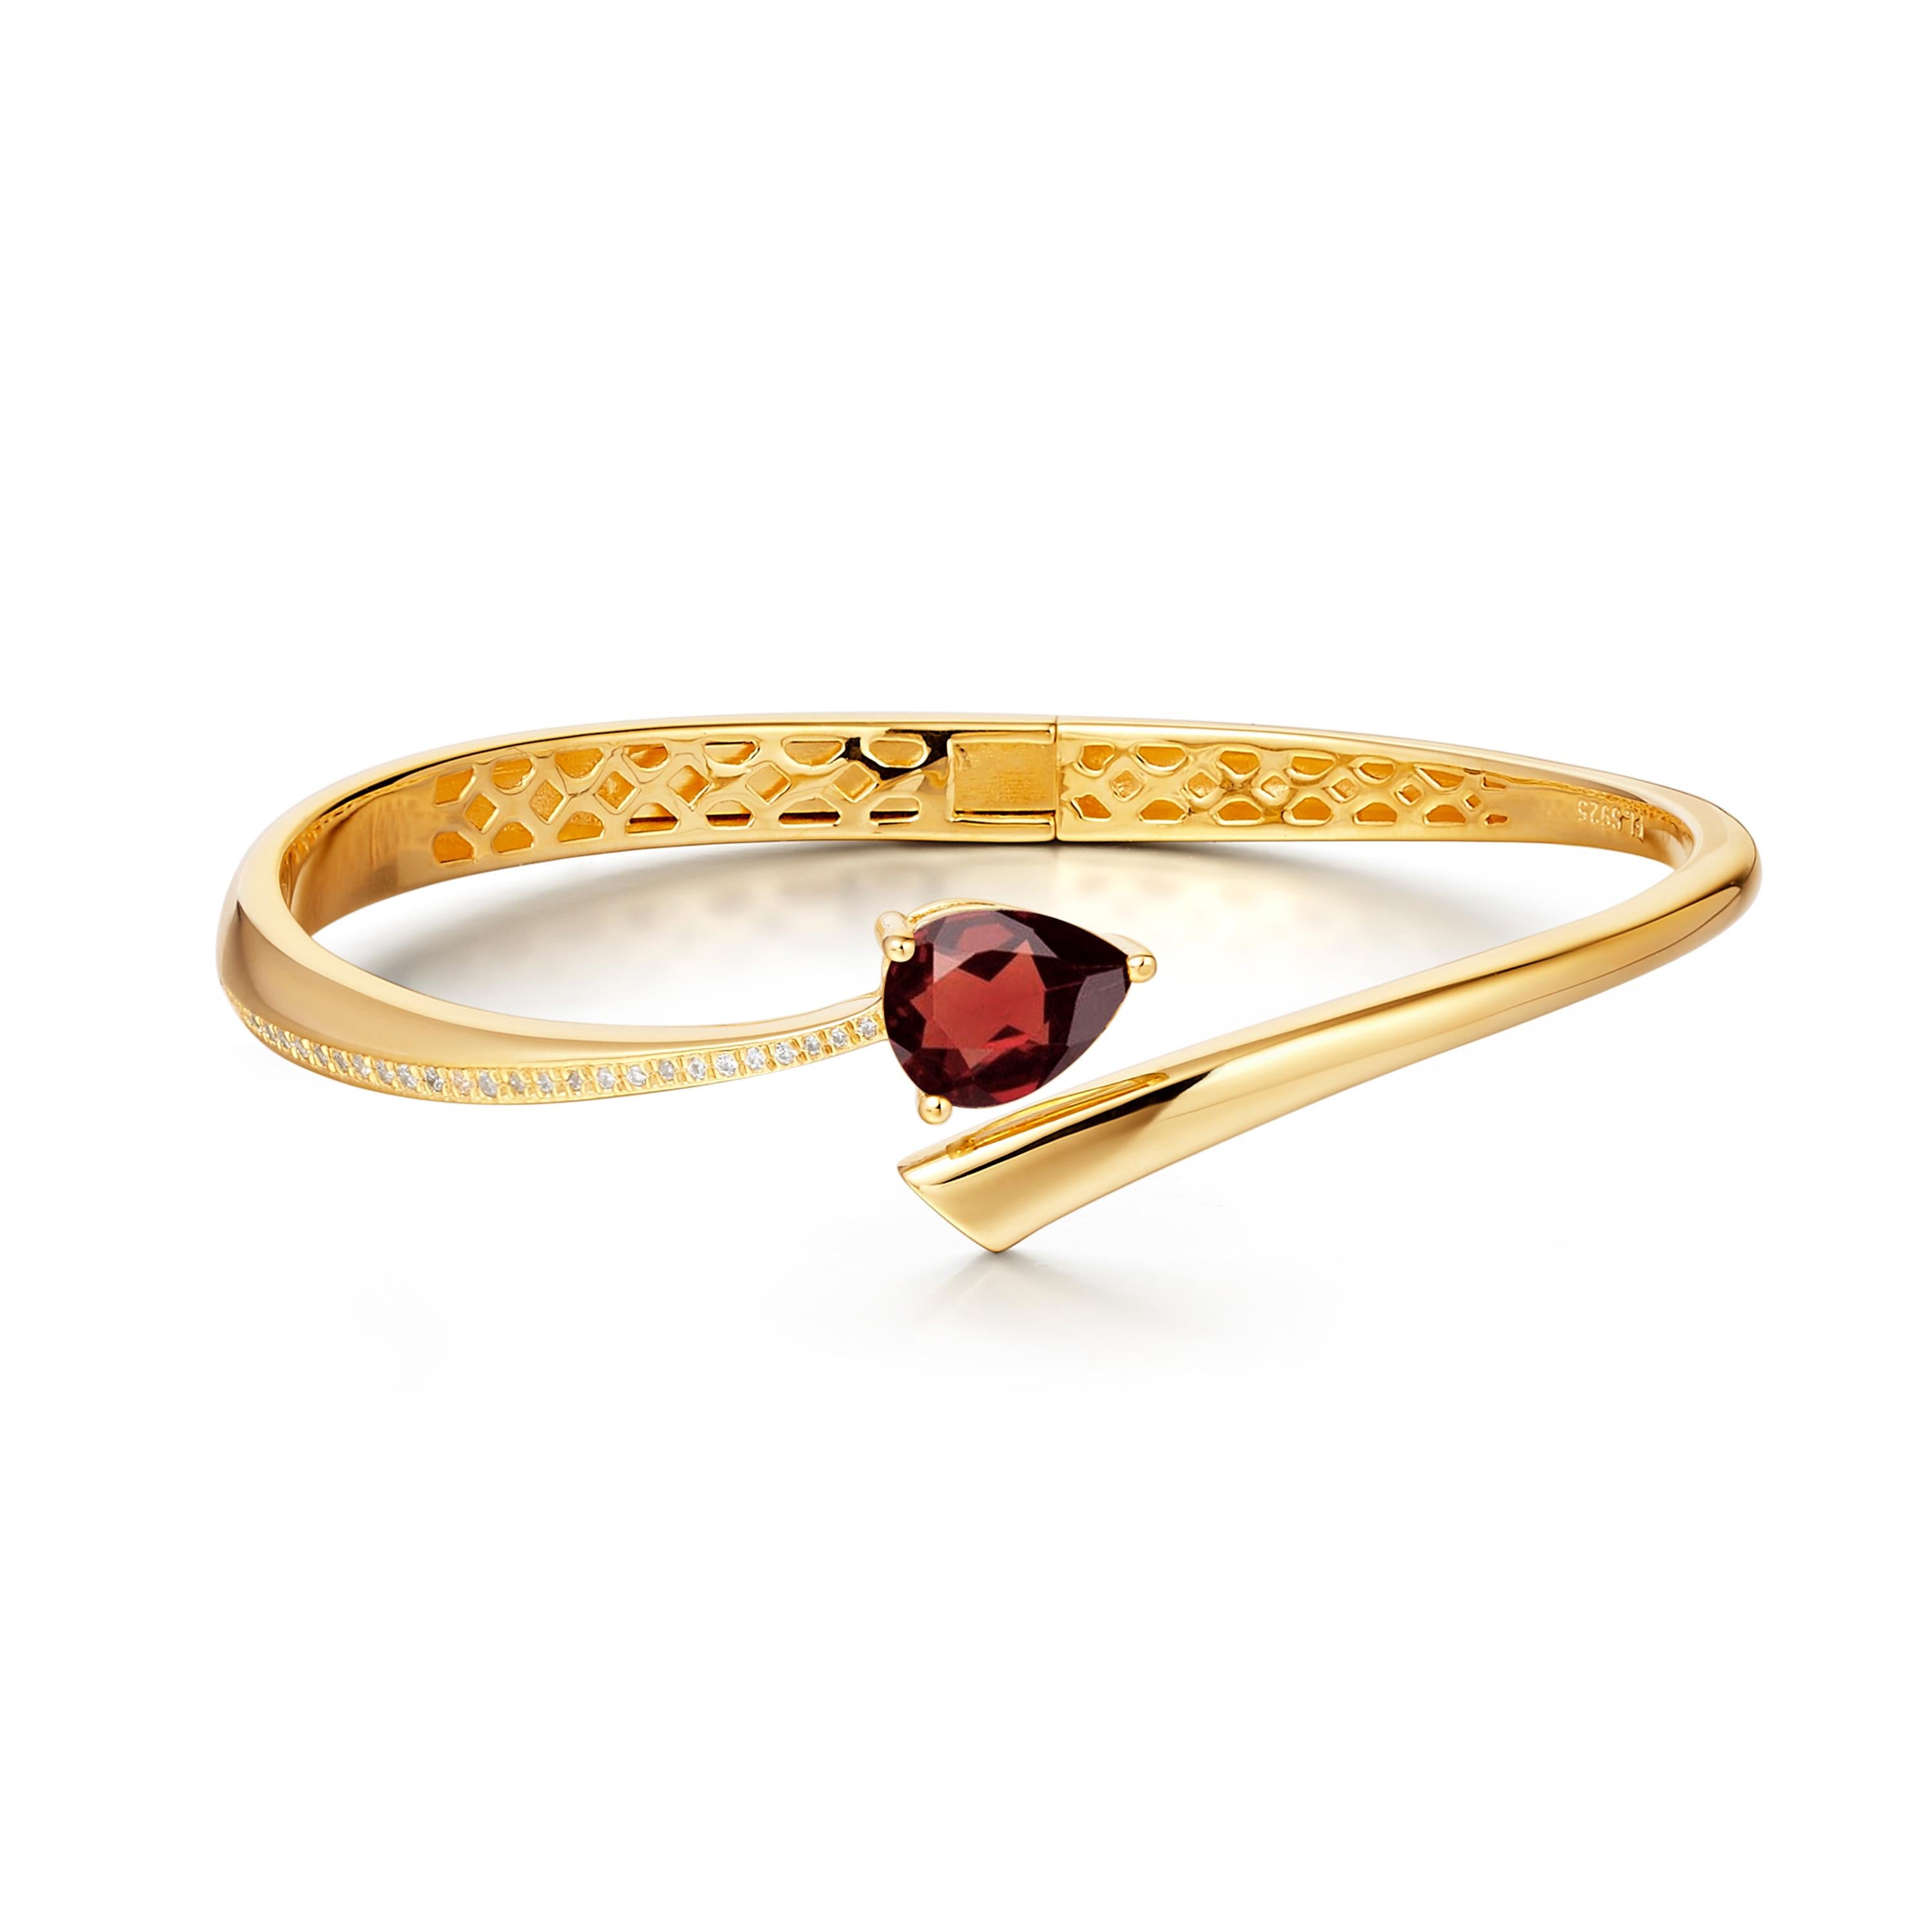 Description:
Shooting Star bangle with pear-cut garnet and Hearts and Arrows* white cubic zirconia, set in high polished 18ct yellow gold plated on sterling silver.

Inner diameter (LxW): small/medium = 56mm x 60 mm, large = 60mm x 65mm

*Hearts and